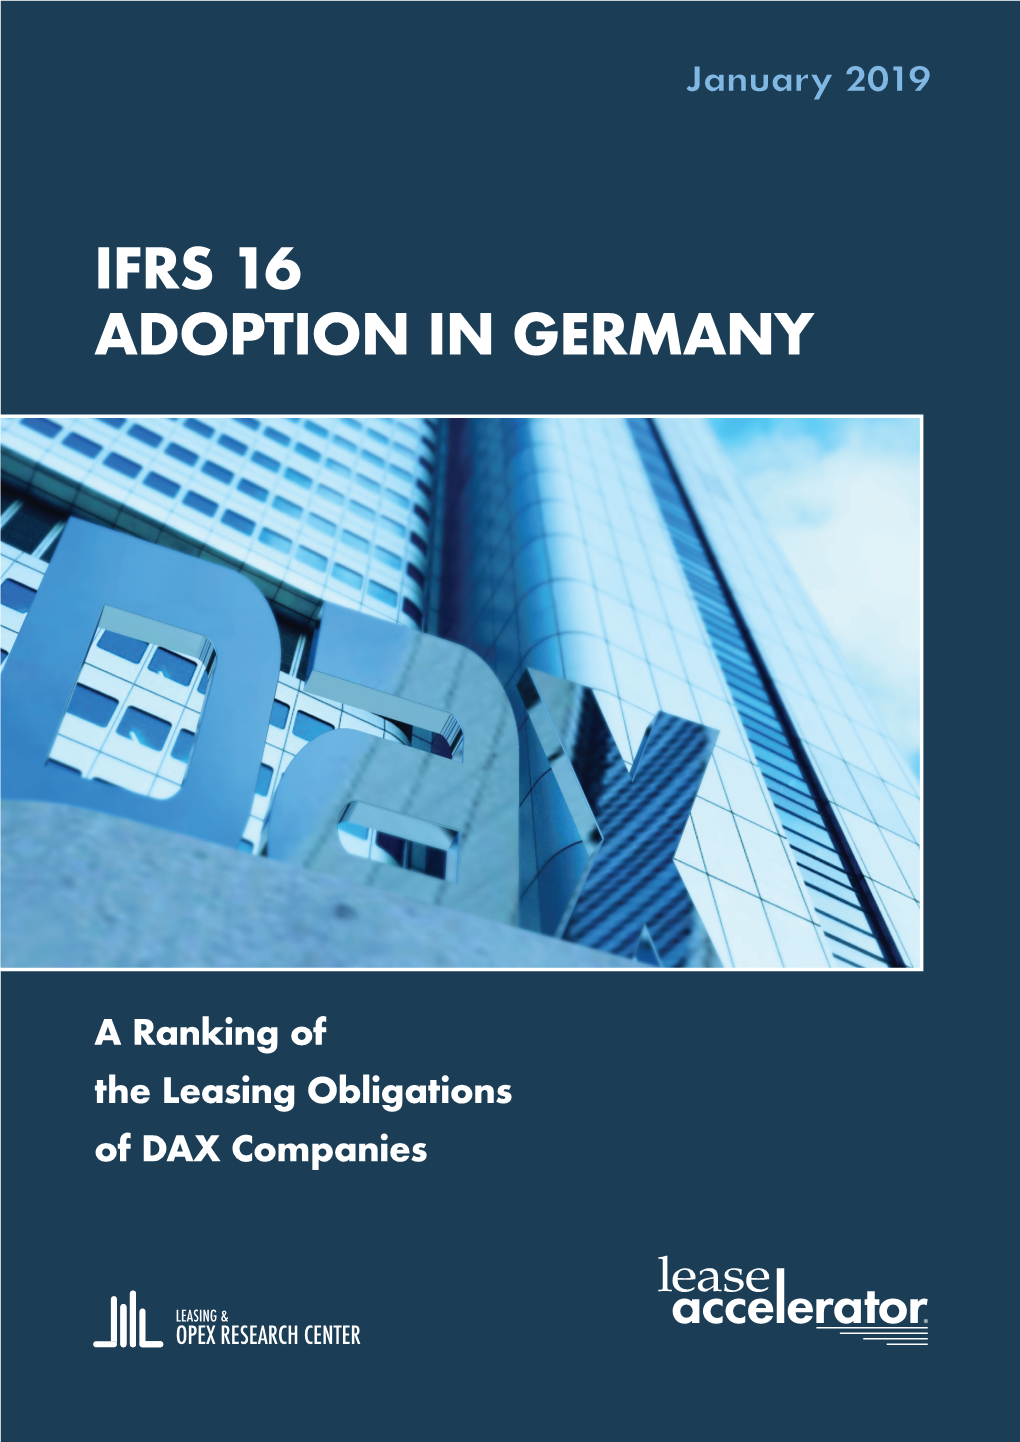 DAX 30 Lease Obligations Ranking 224190